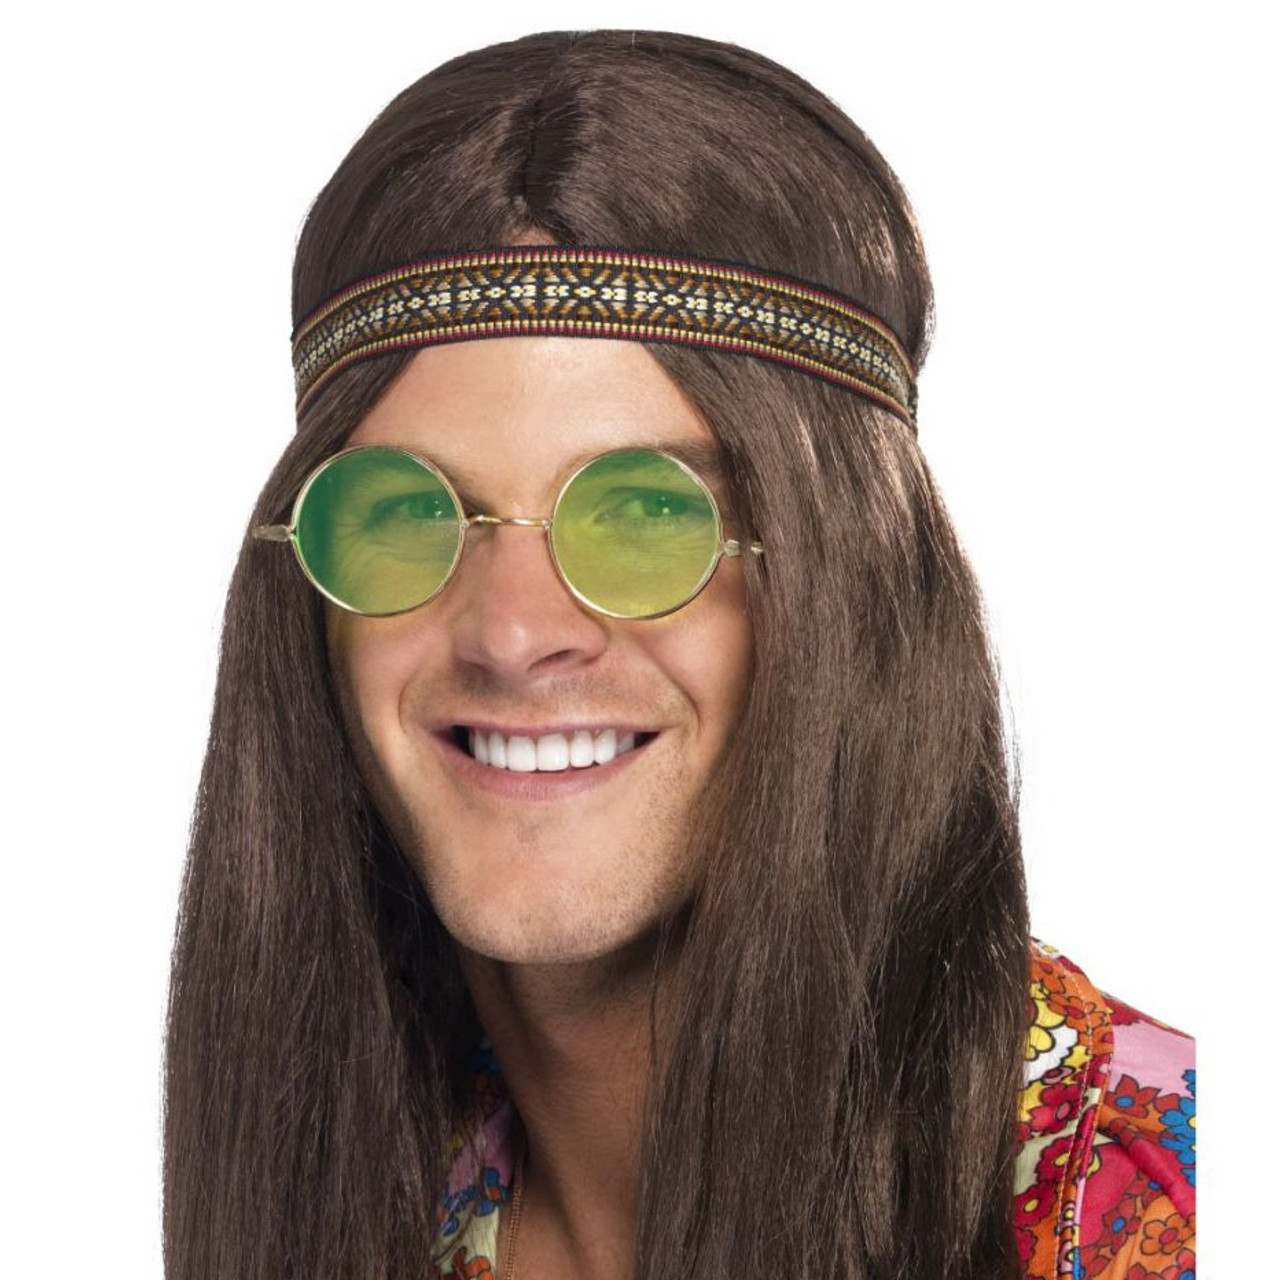 Hippie Accessory Kit with Headband, Coloured Glasses, Peace